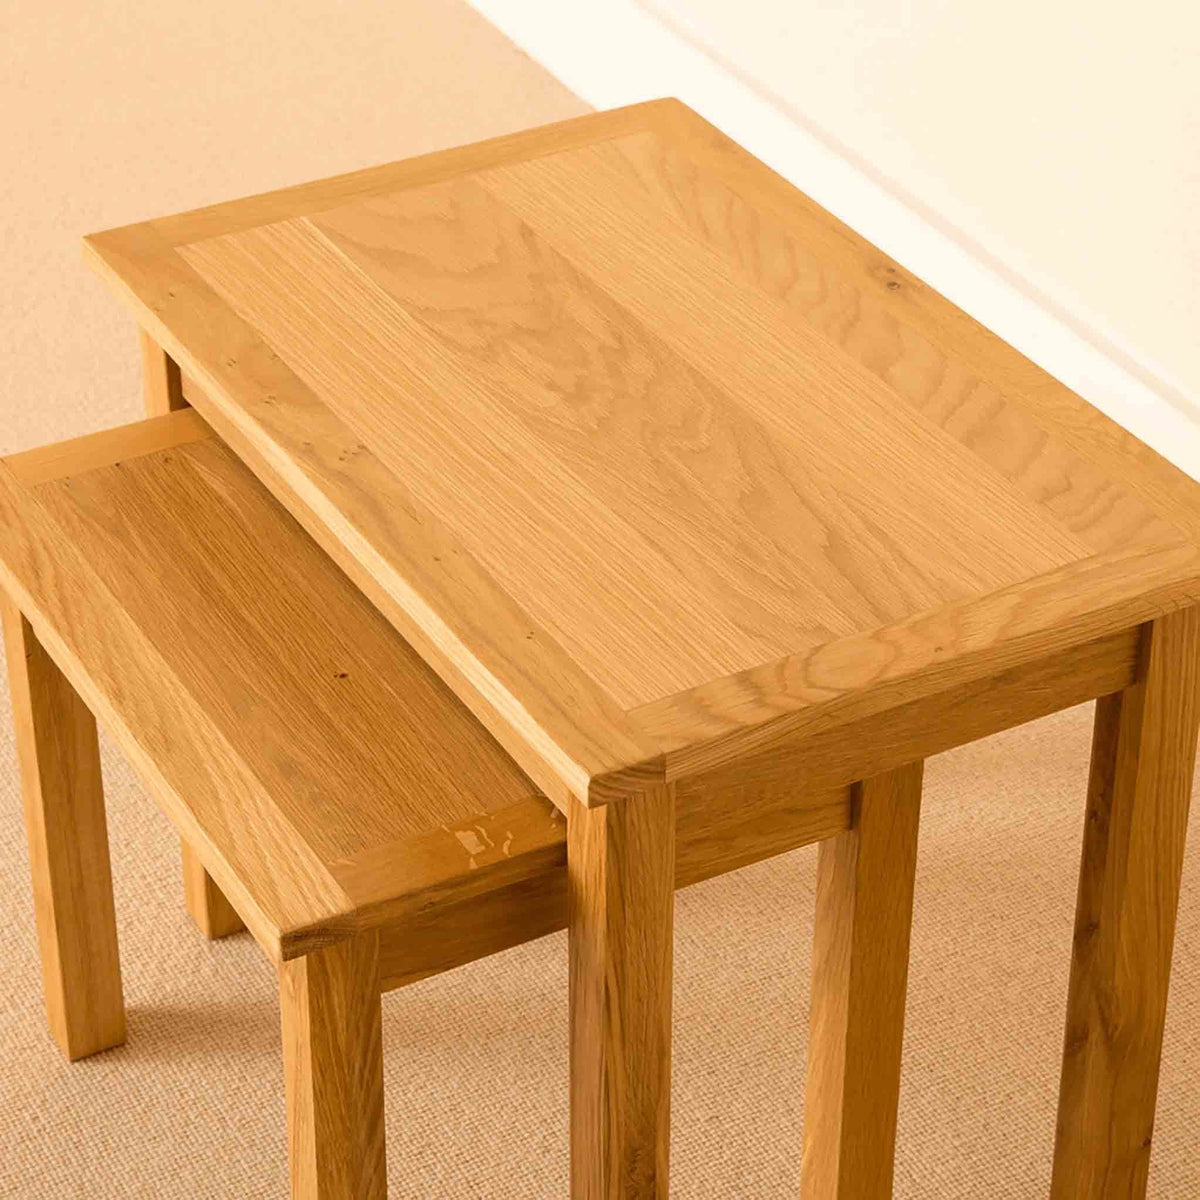 Top view - Newlyn Oak Nest Of Tables